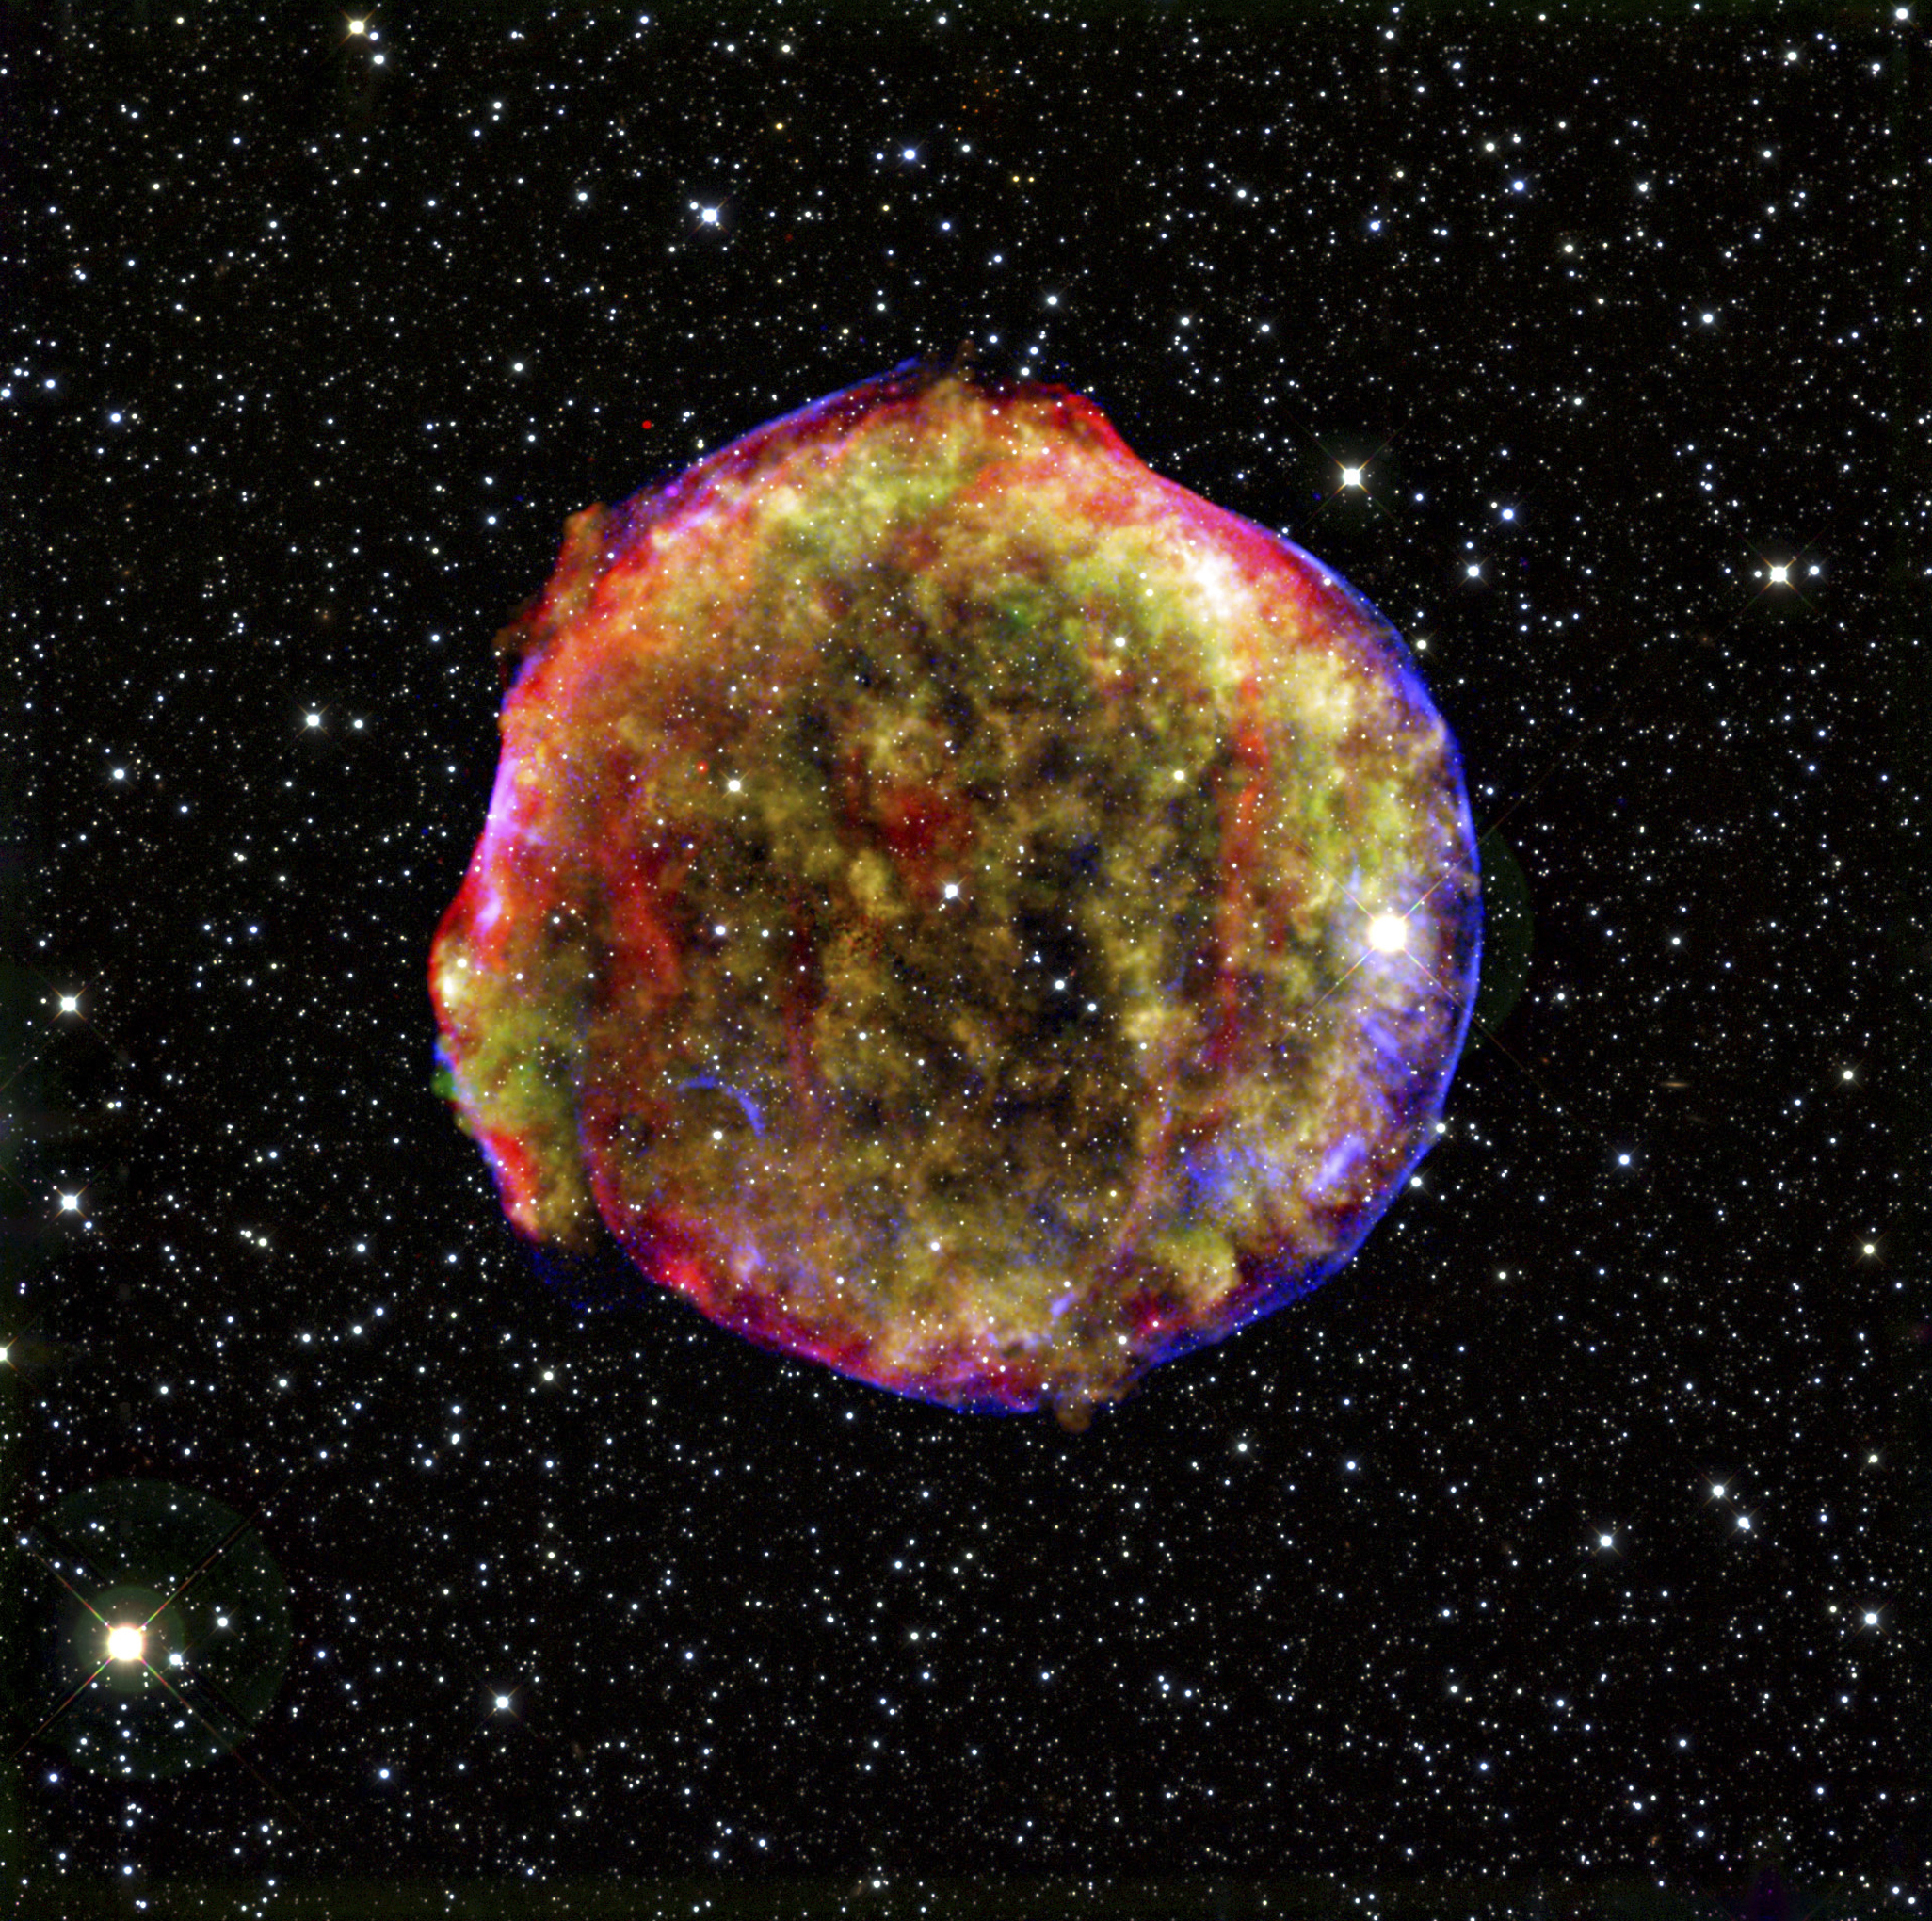 Glowing cloud of gas left from the Tycho supernova of 400 years ago.